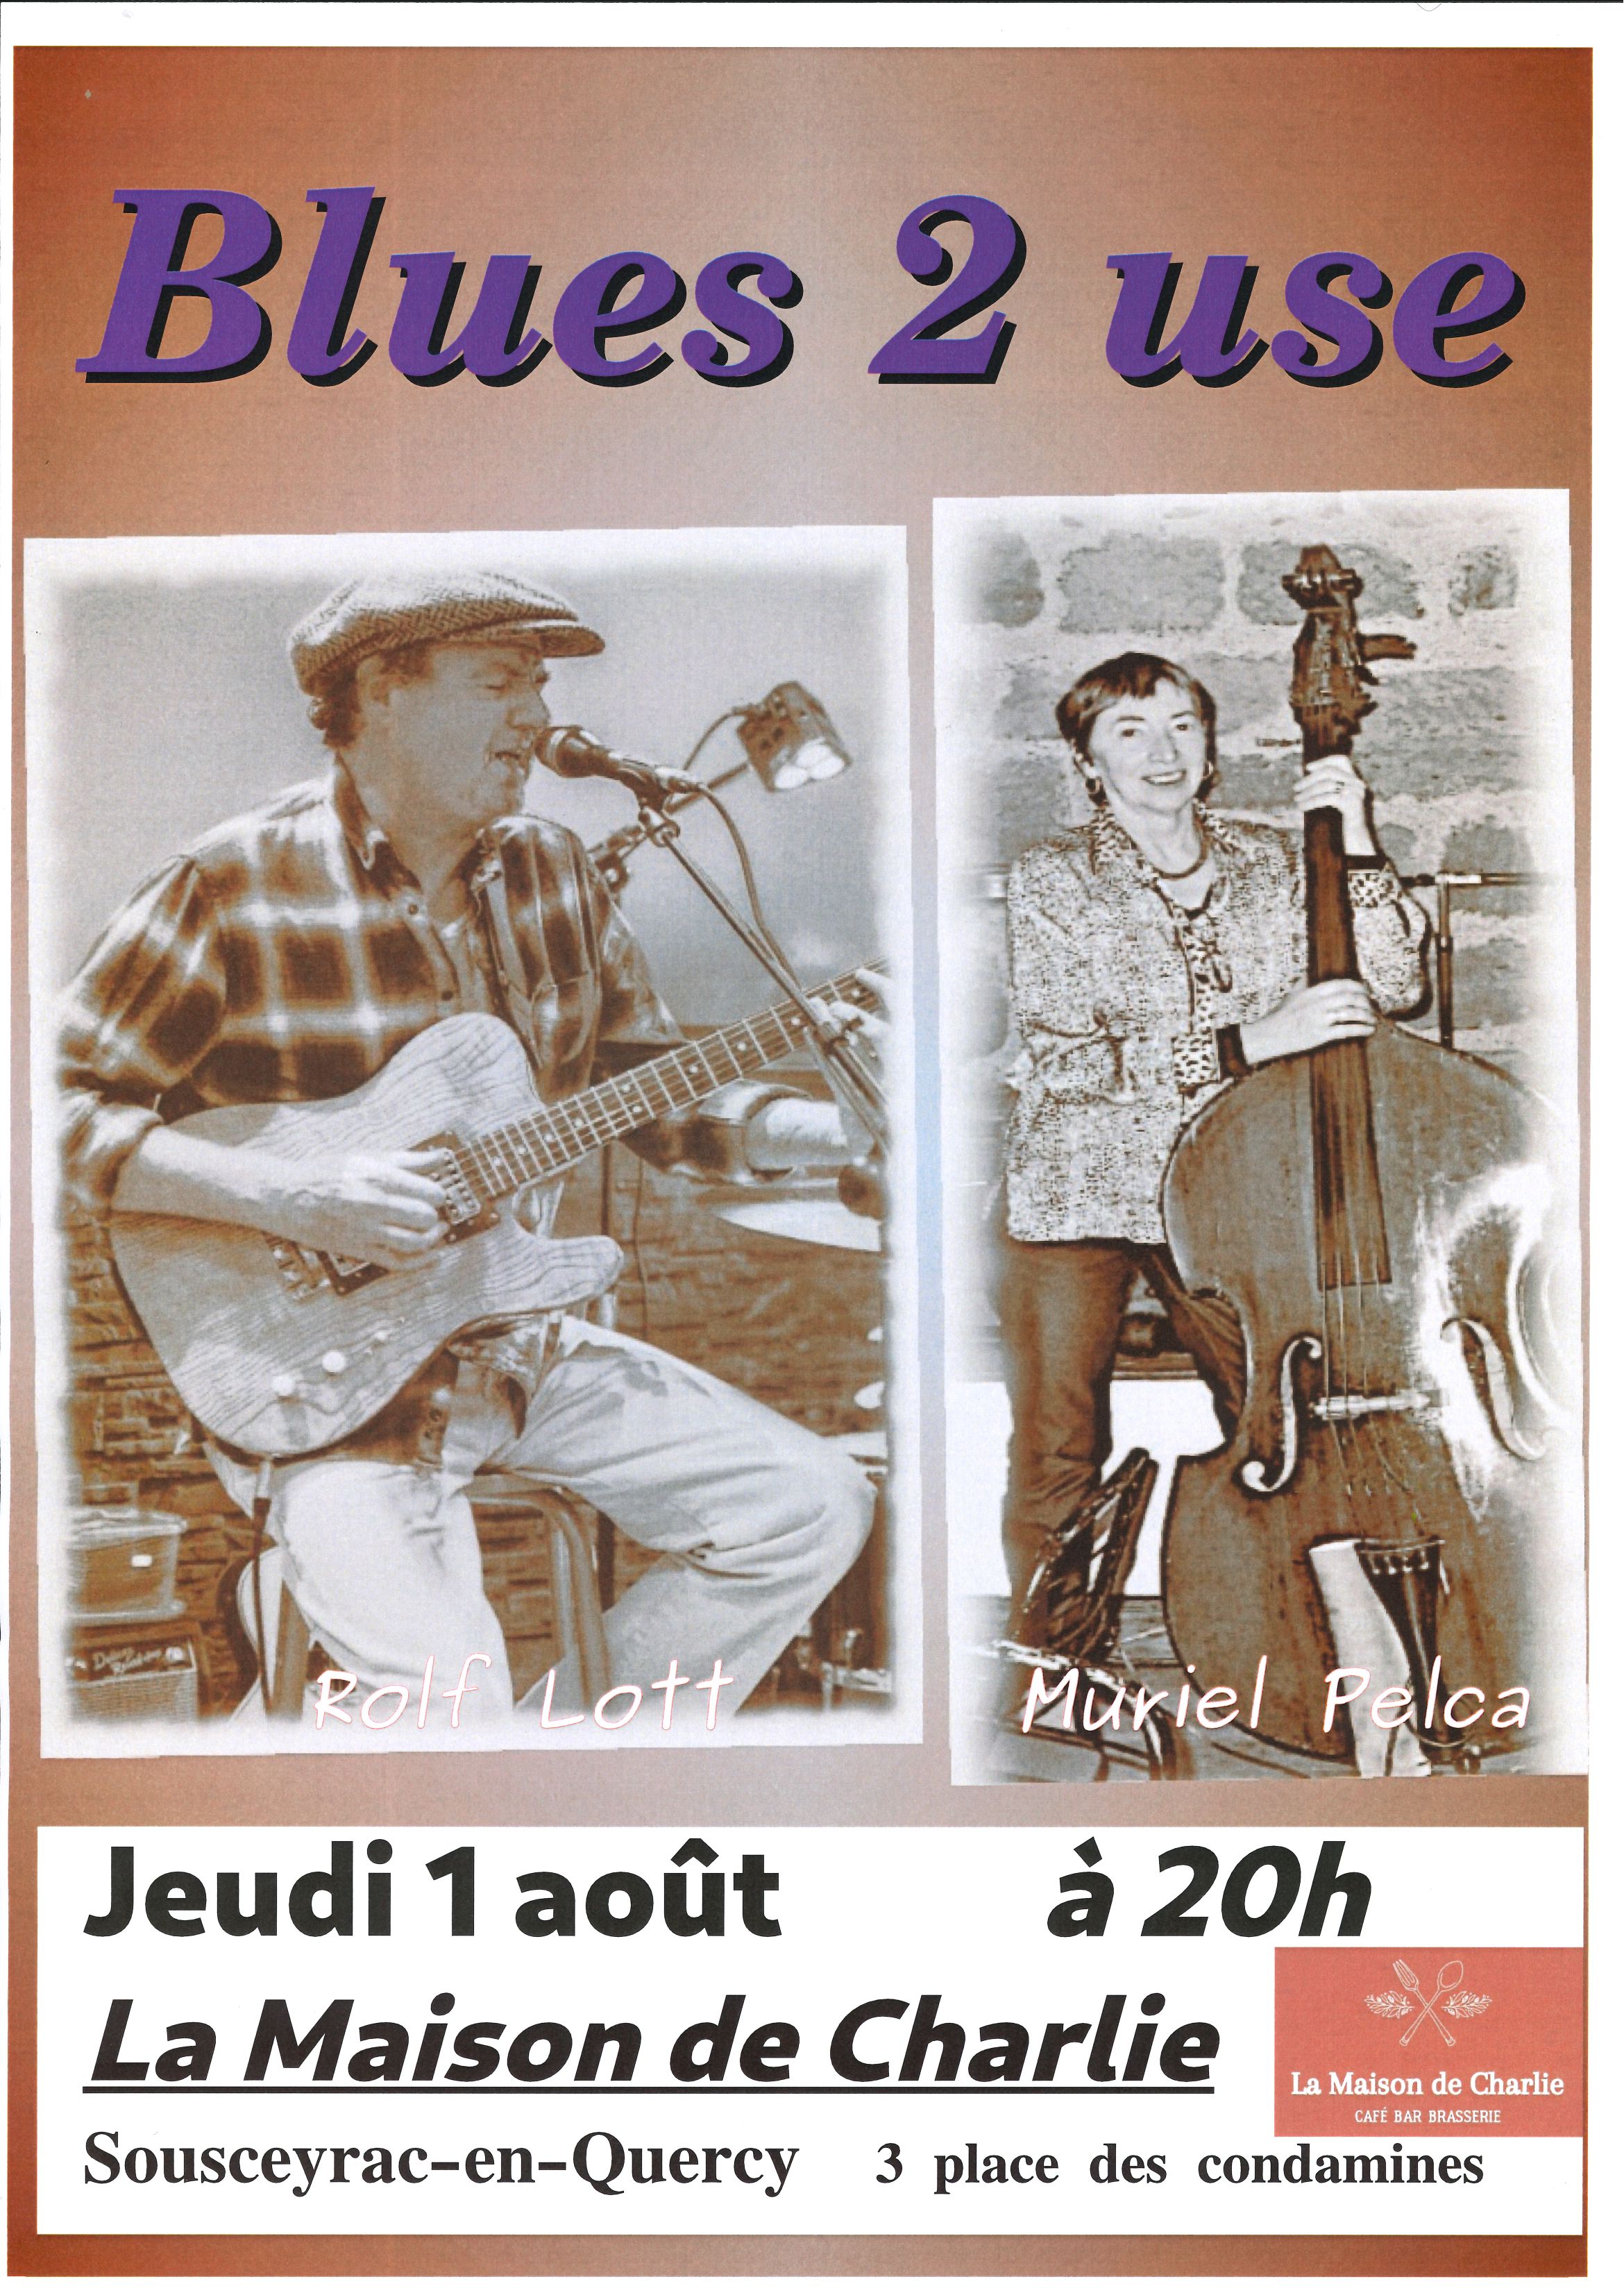 Figeac : Concert Blues 2 use